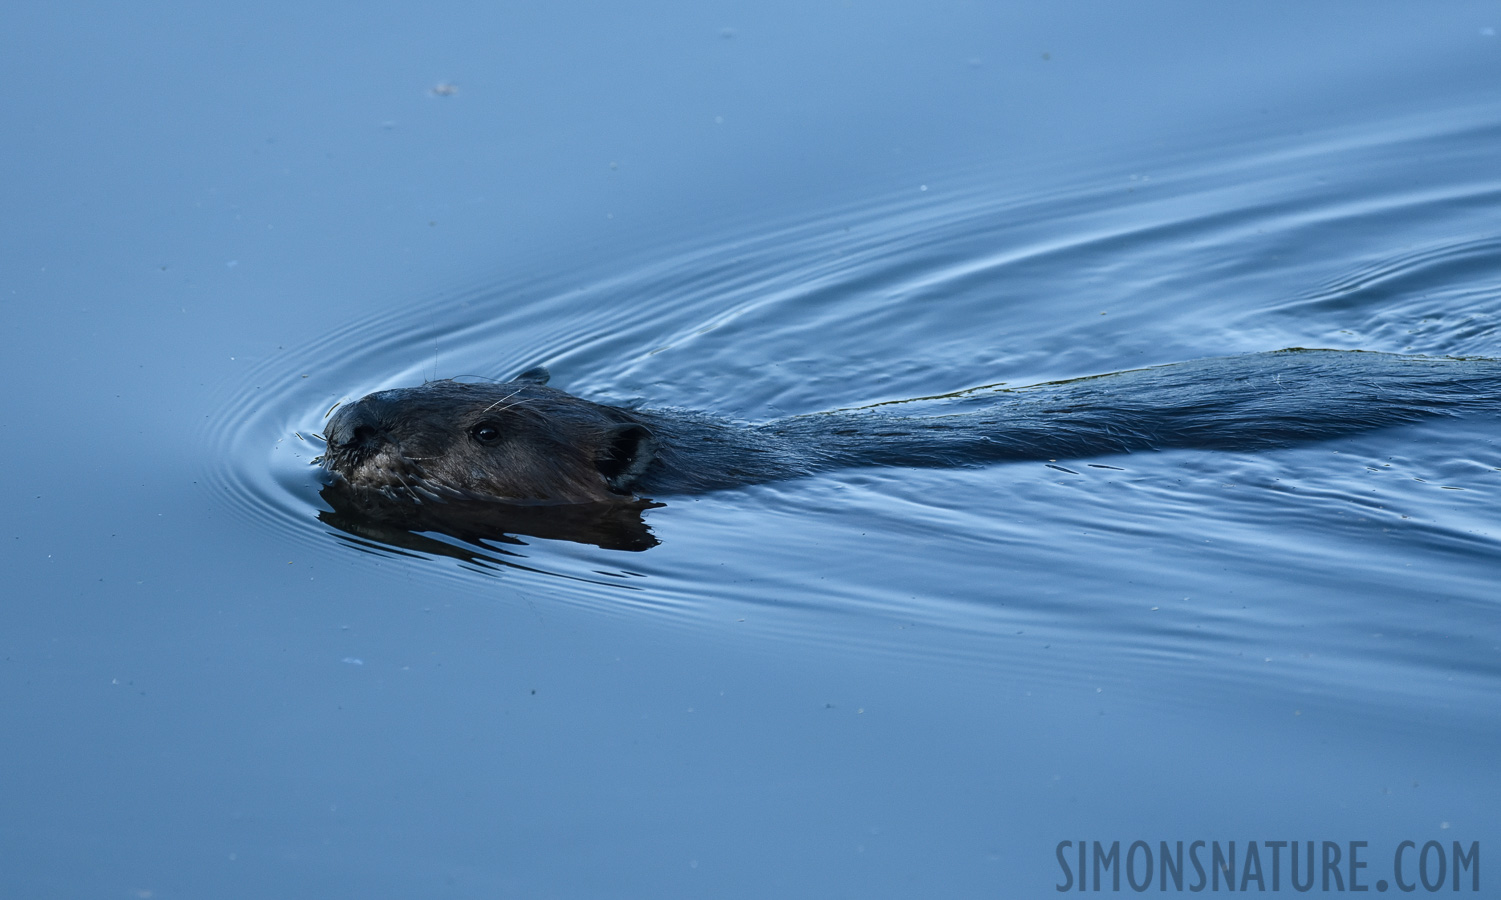 Castor canadensis [380 mm, 1/800 sec at f / 7.1, ISO 1600]